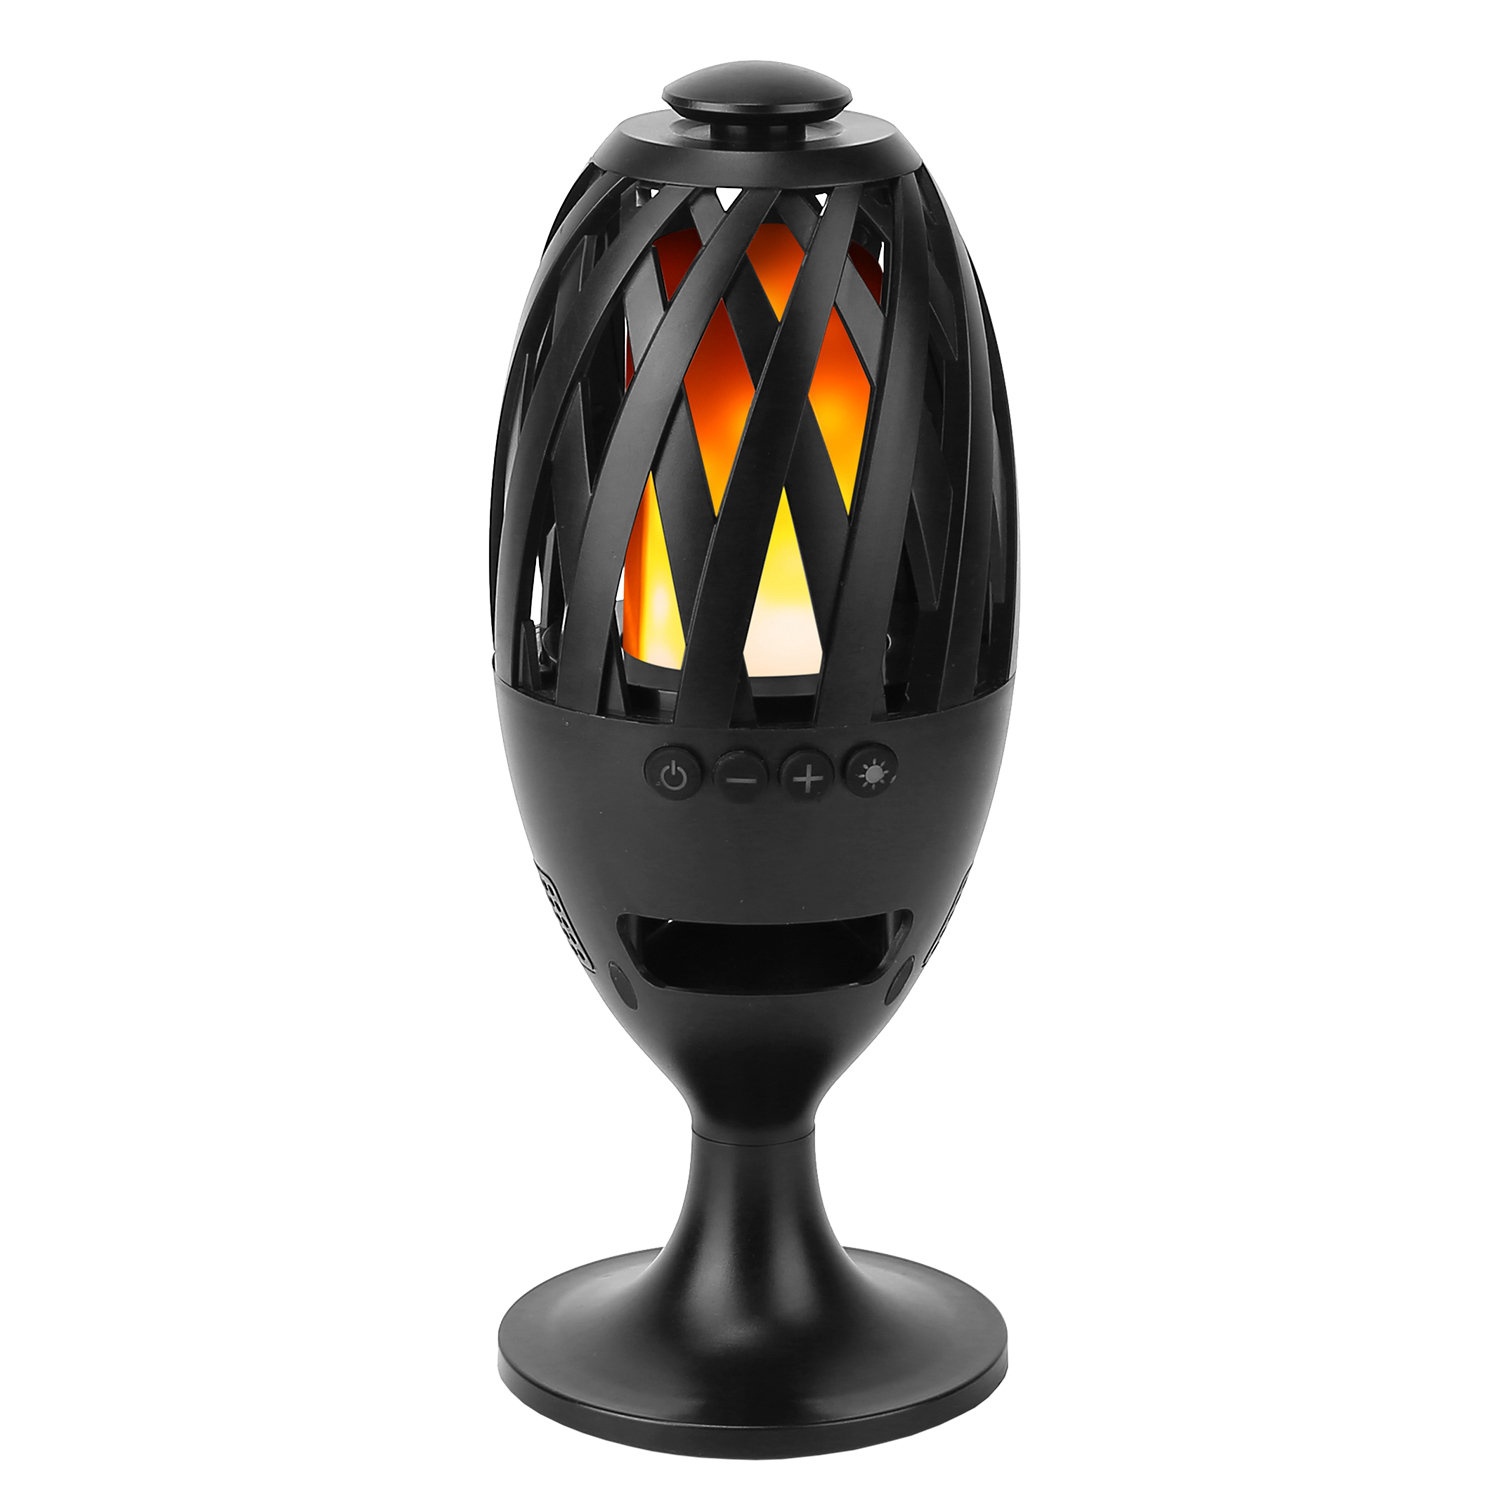 https://visualhunt.com/photos/23/9-4-battery-powered-outdoor-table-lamp.jpg